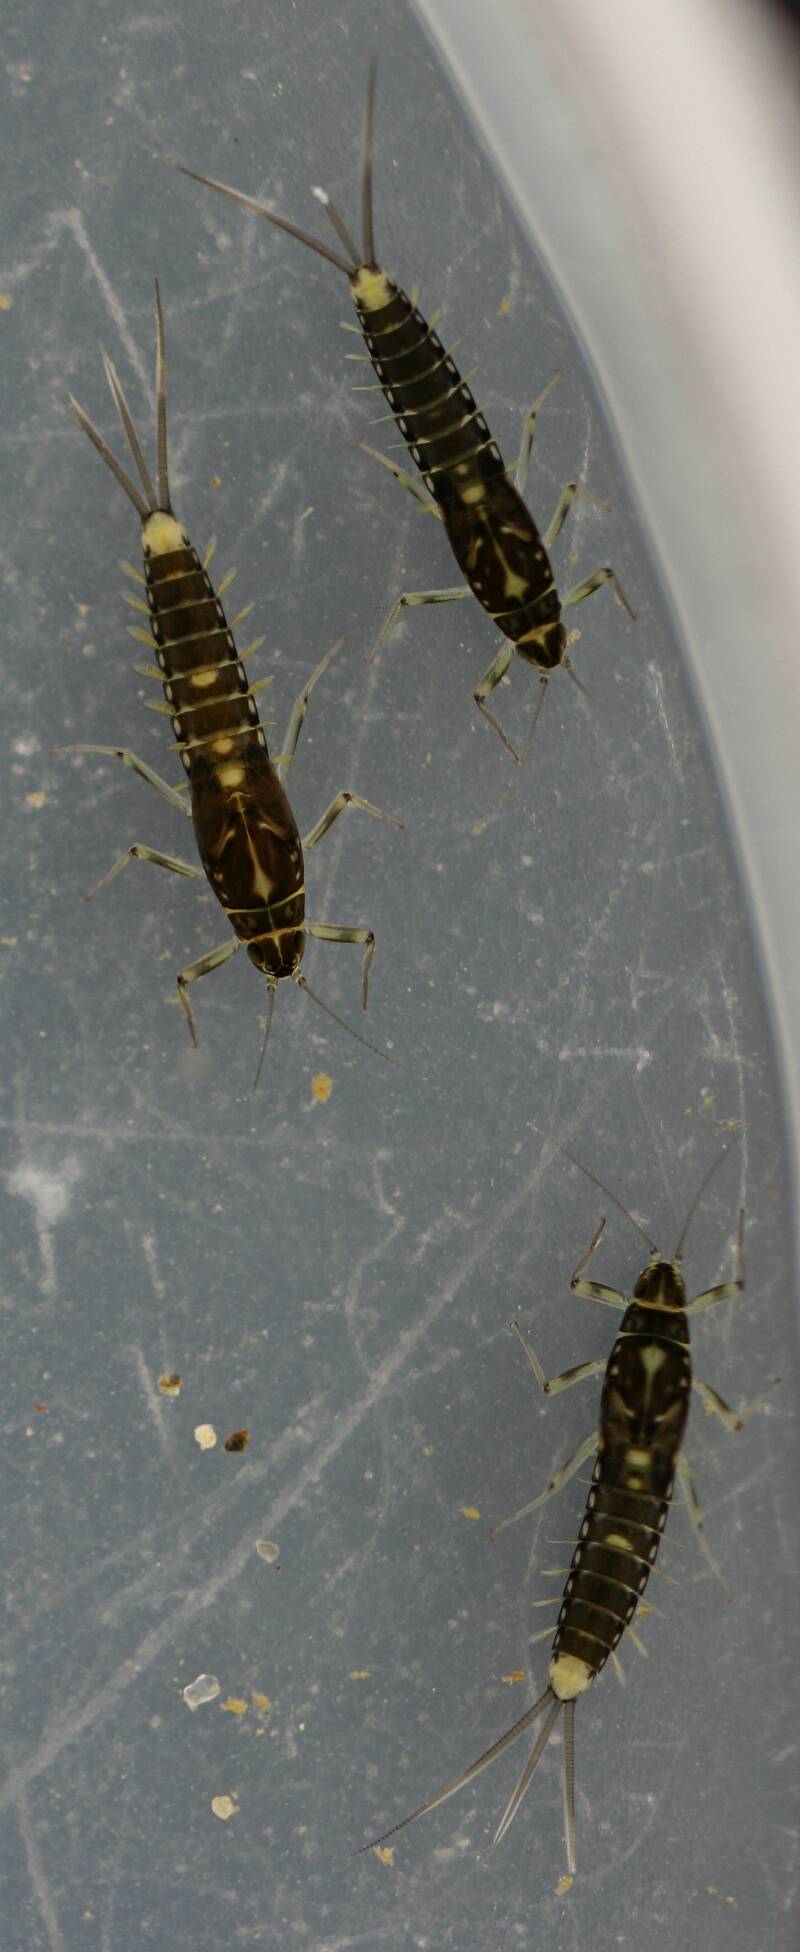 Fallceon thermophilos nymphs. Mature females. 5 - 5.5 mm (excluding cerci). Collected April 21, 2014.